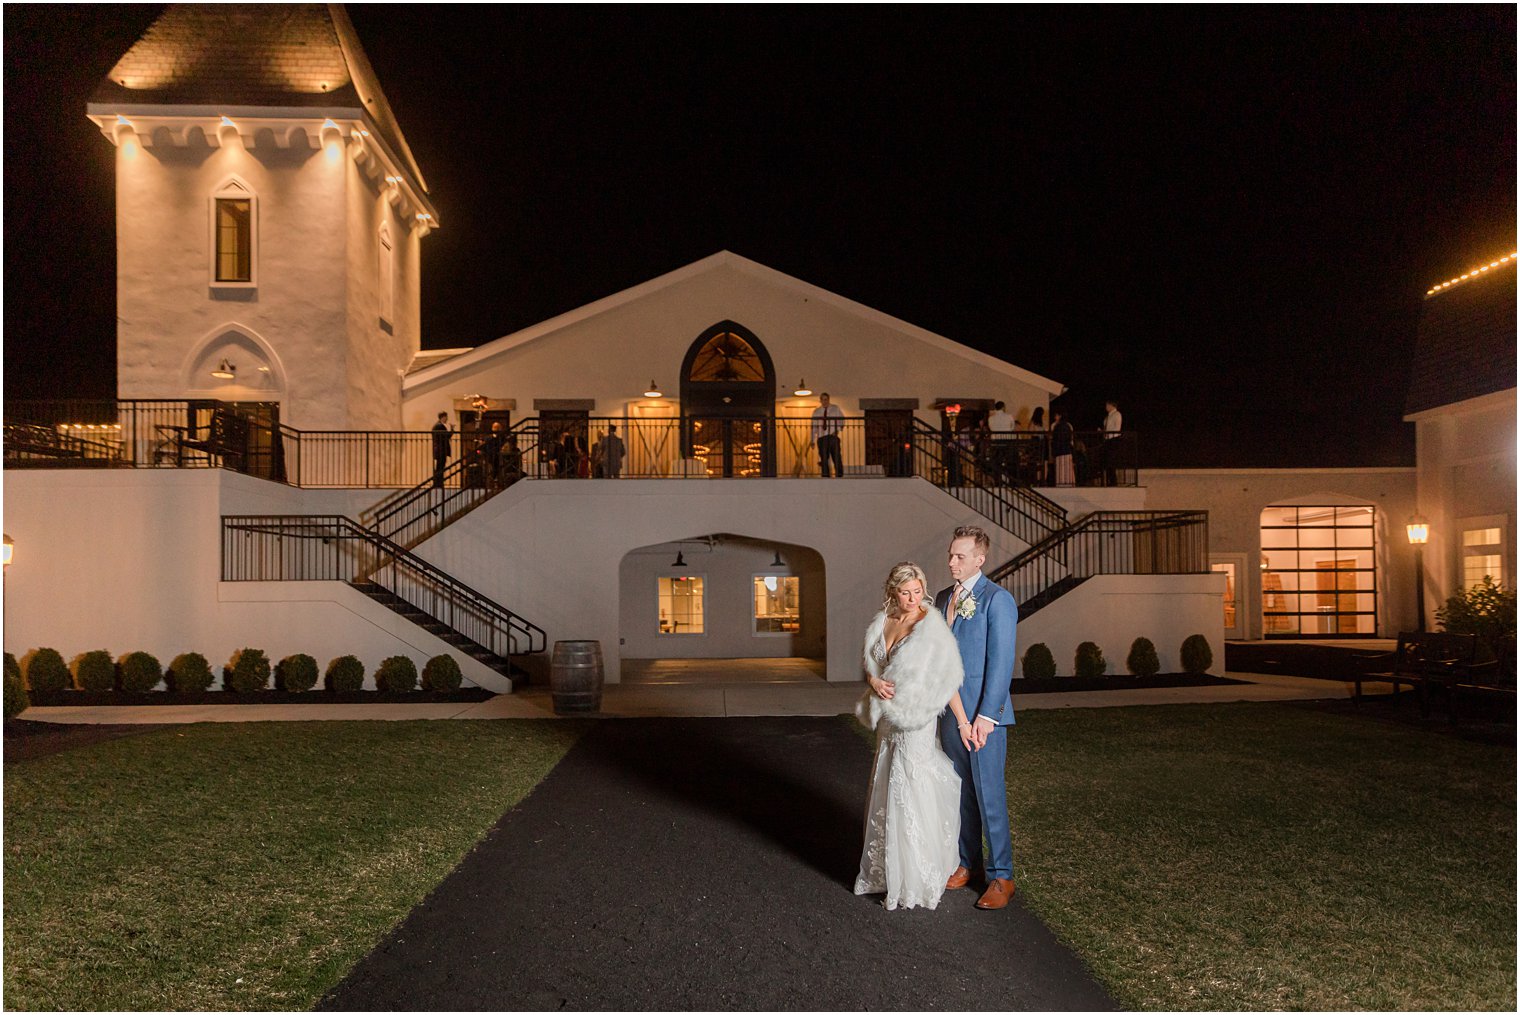 night photo of bride in groom at rustic wedding reception in Vineyard Ballroom at Renault Winery South Jersey Venue in Egg Harbor Township NJ